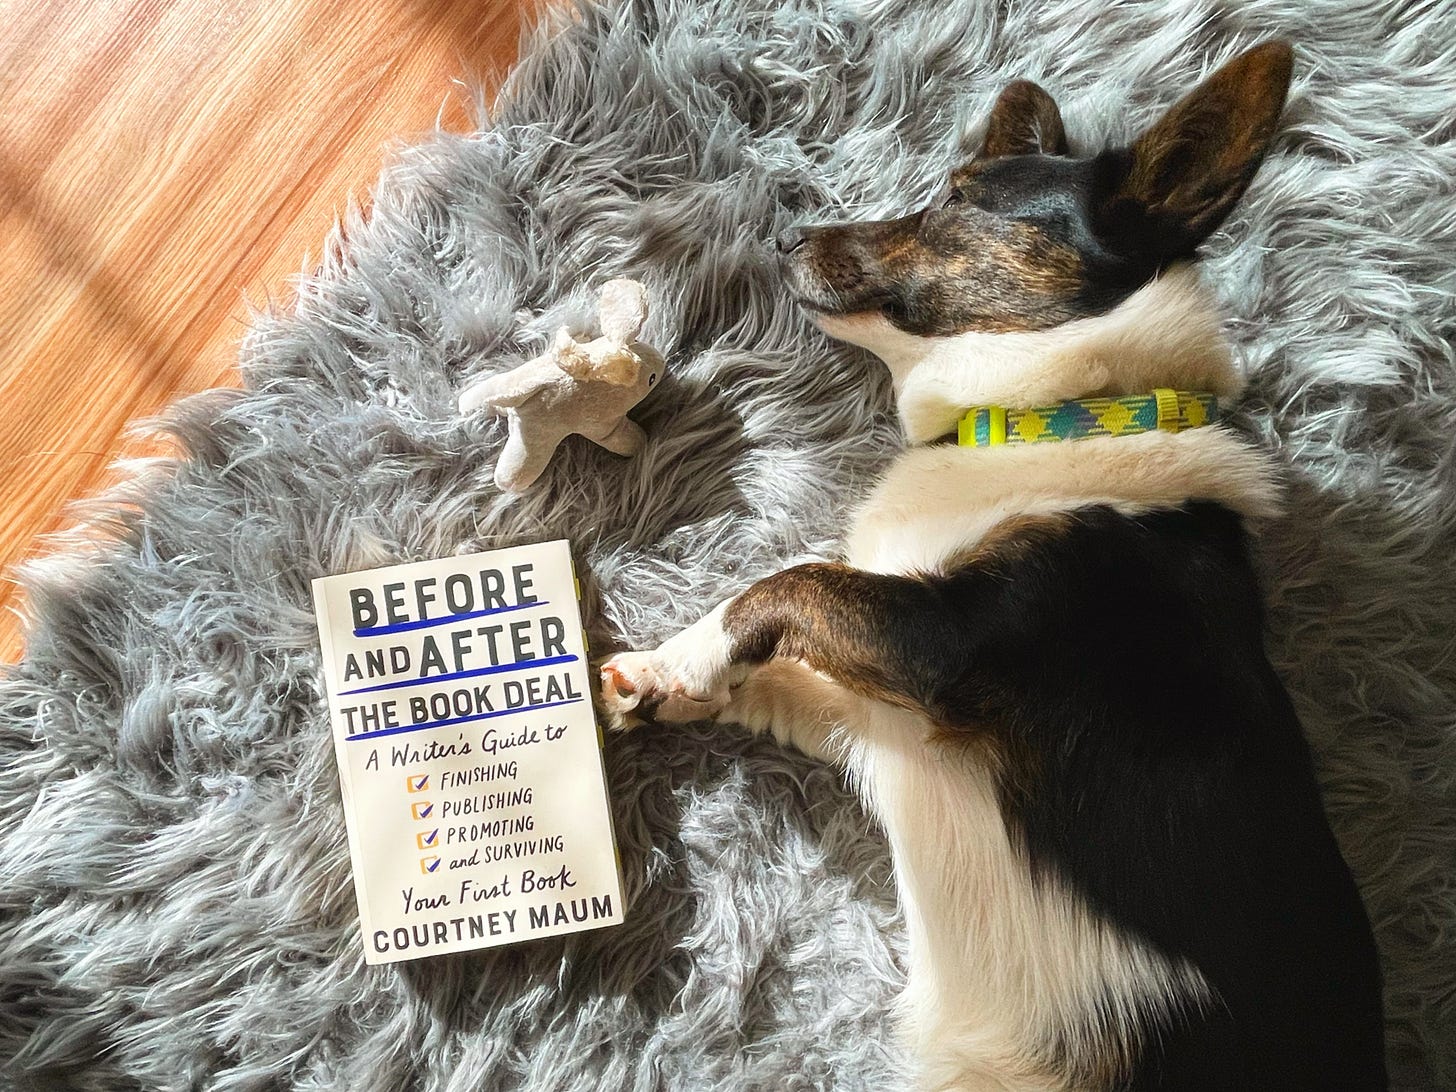 a photo of Gwen, a black and white Cardigan Welsh Corgi, lying on a gray furry run next to the book Before and After the Book Deal.